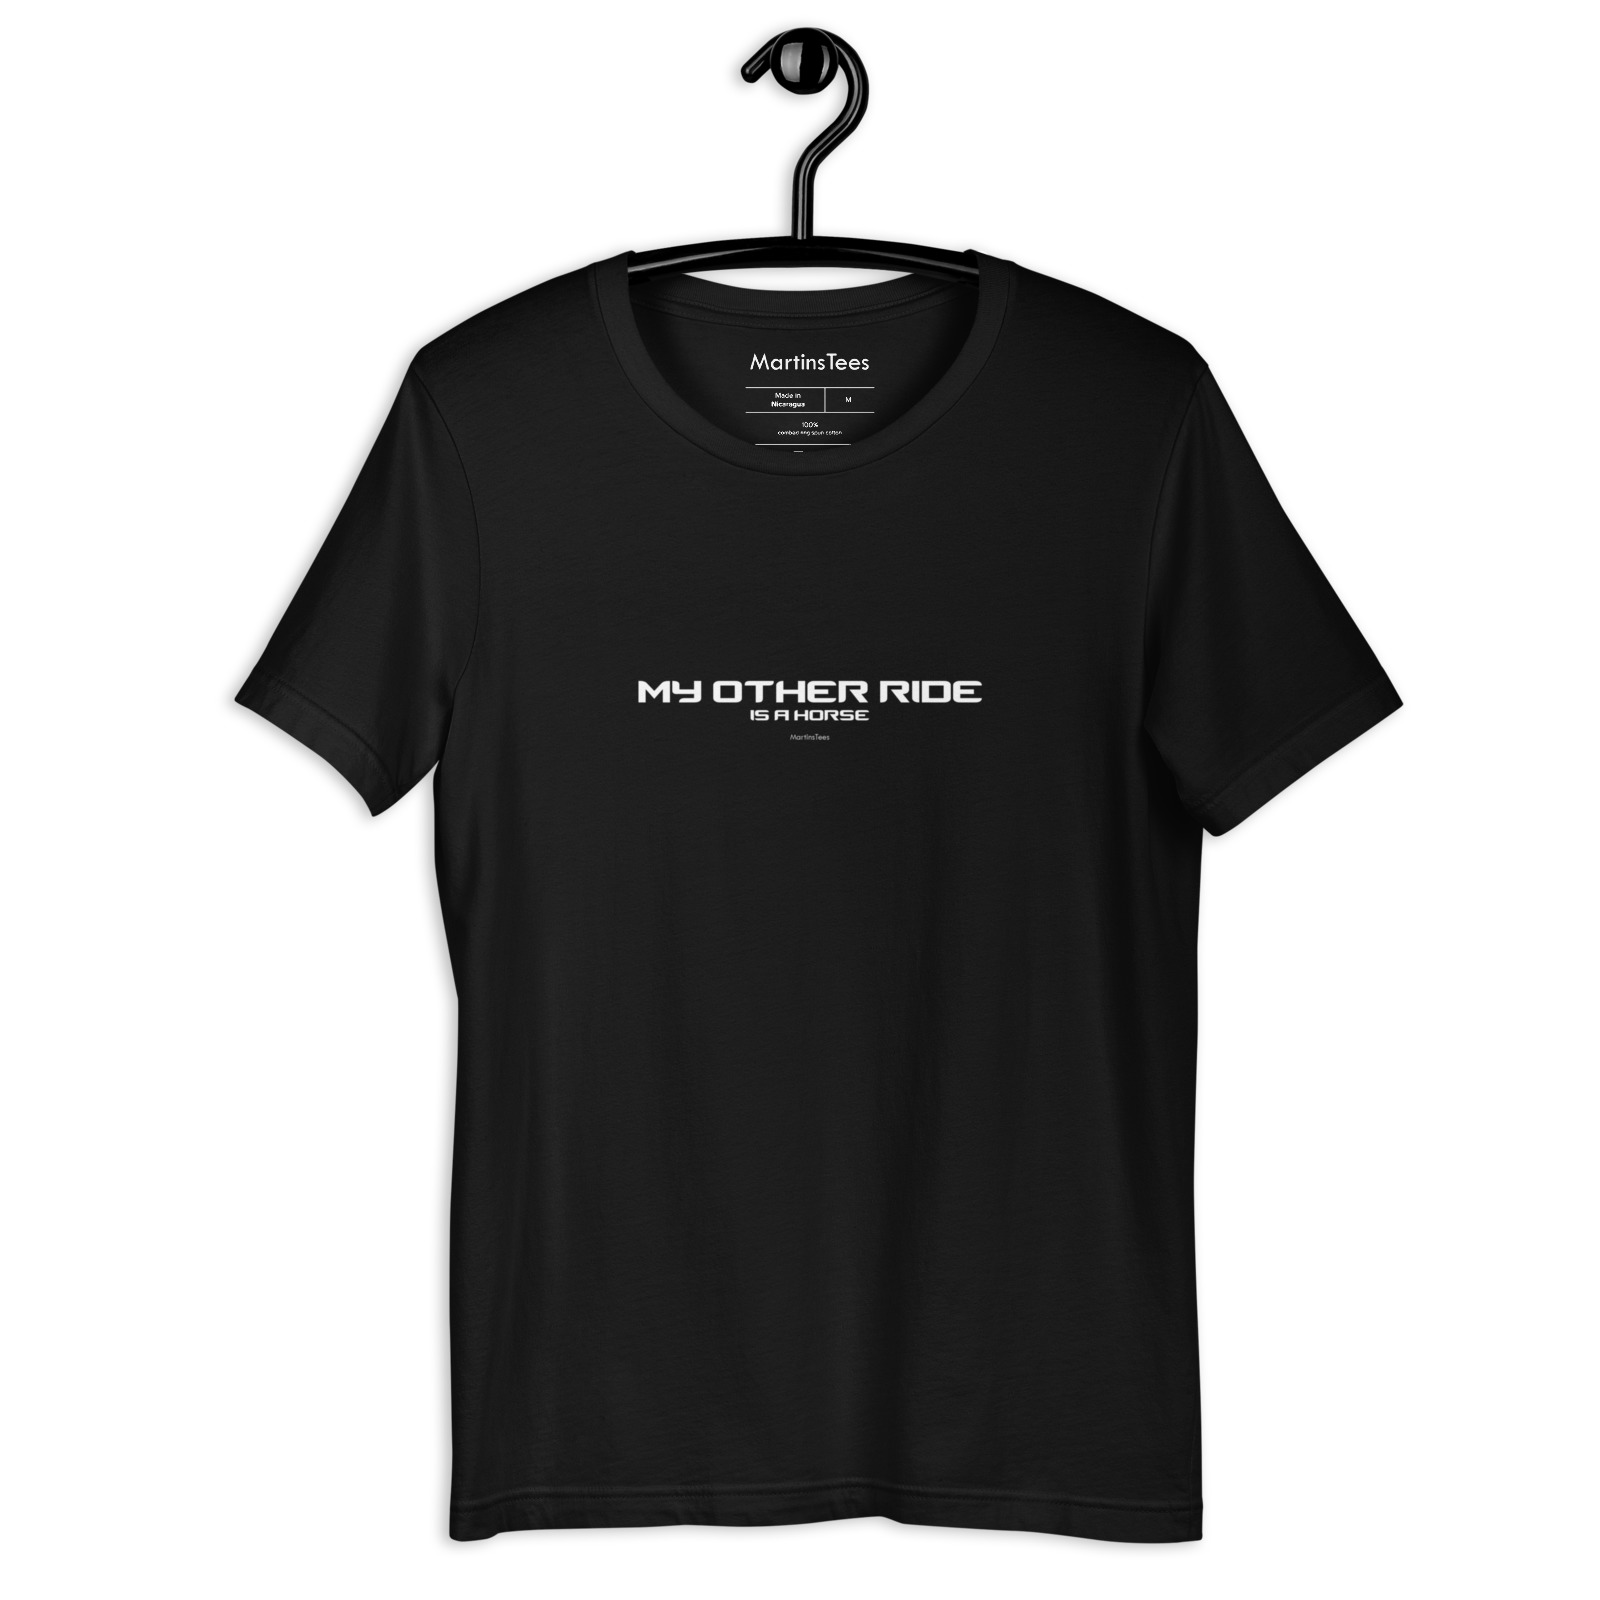 T-shirt: MY OTHER RIDE - IS A HORSE